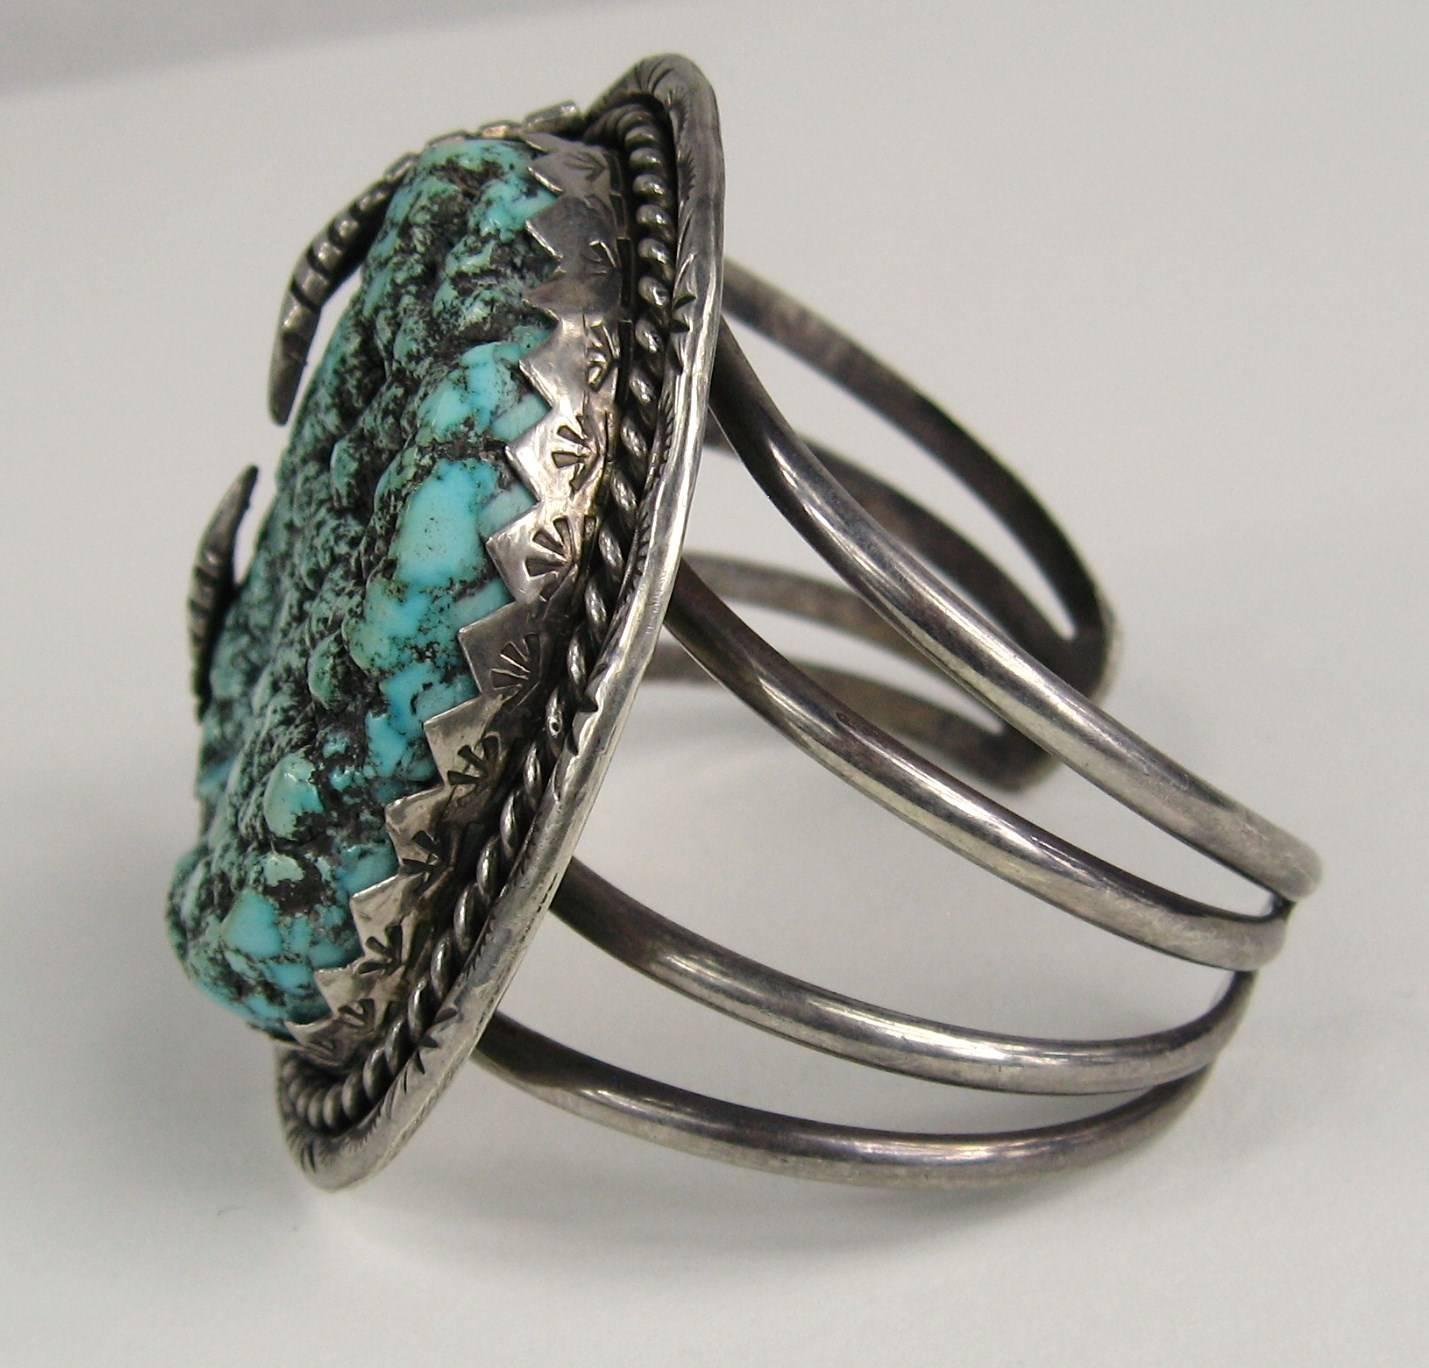 Amazing craftsmanship on this sterling silver bracelet. Large Sea Foam Turquoise set in a feathered sterling 4 rung hand crafted bracelet. The bracelet measures 2.42in. x 2.24 in. wide. Hallmarked inside the bracelet. We have a necklace that will